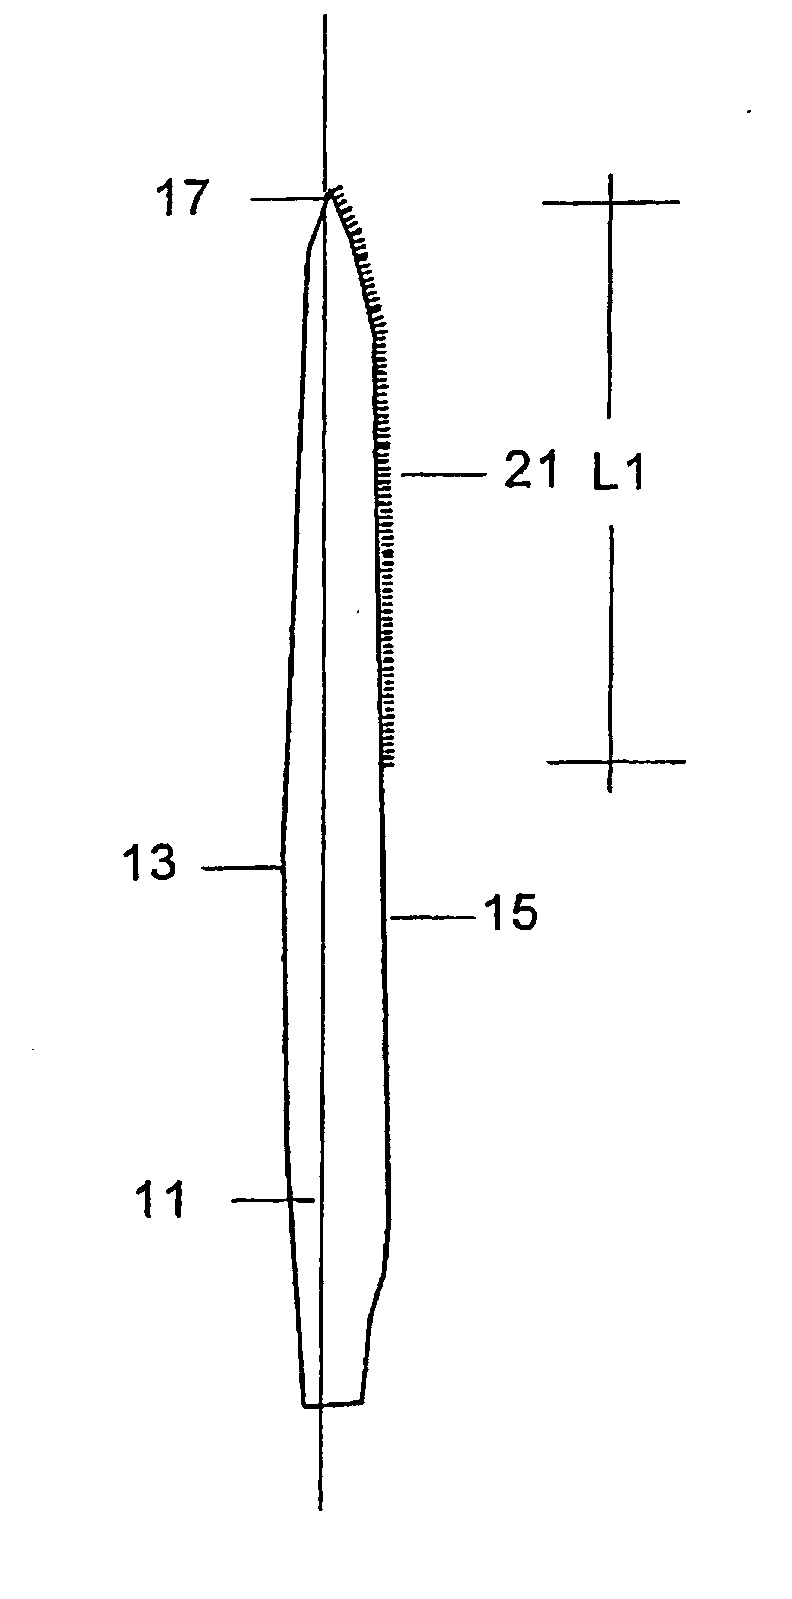 Wind turbine with noise-reducing blade rotor